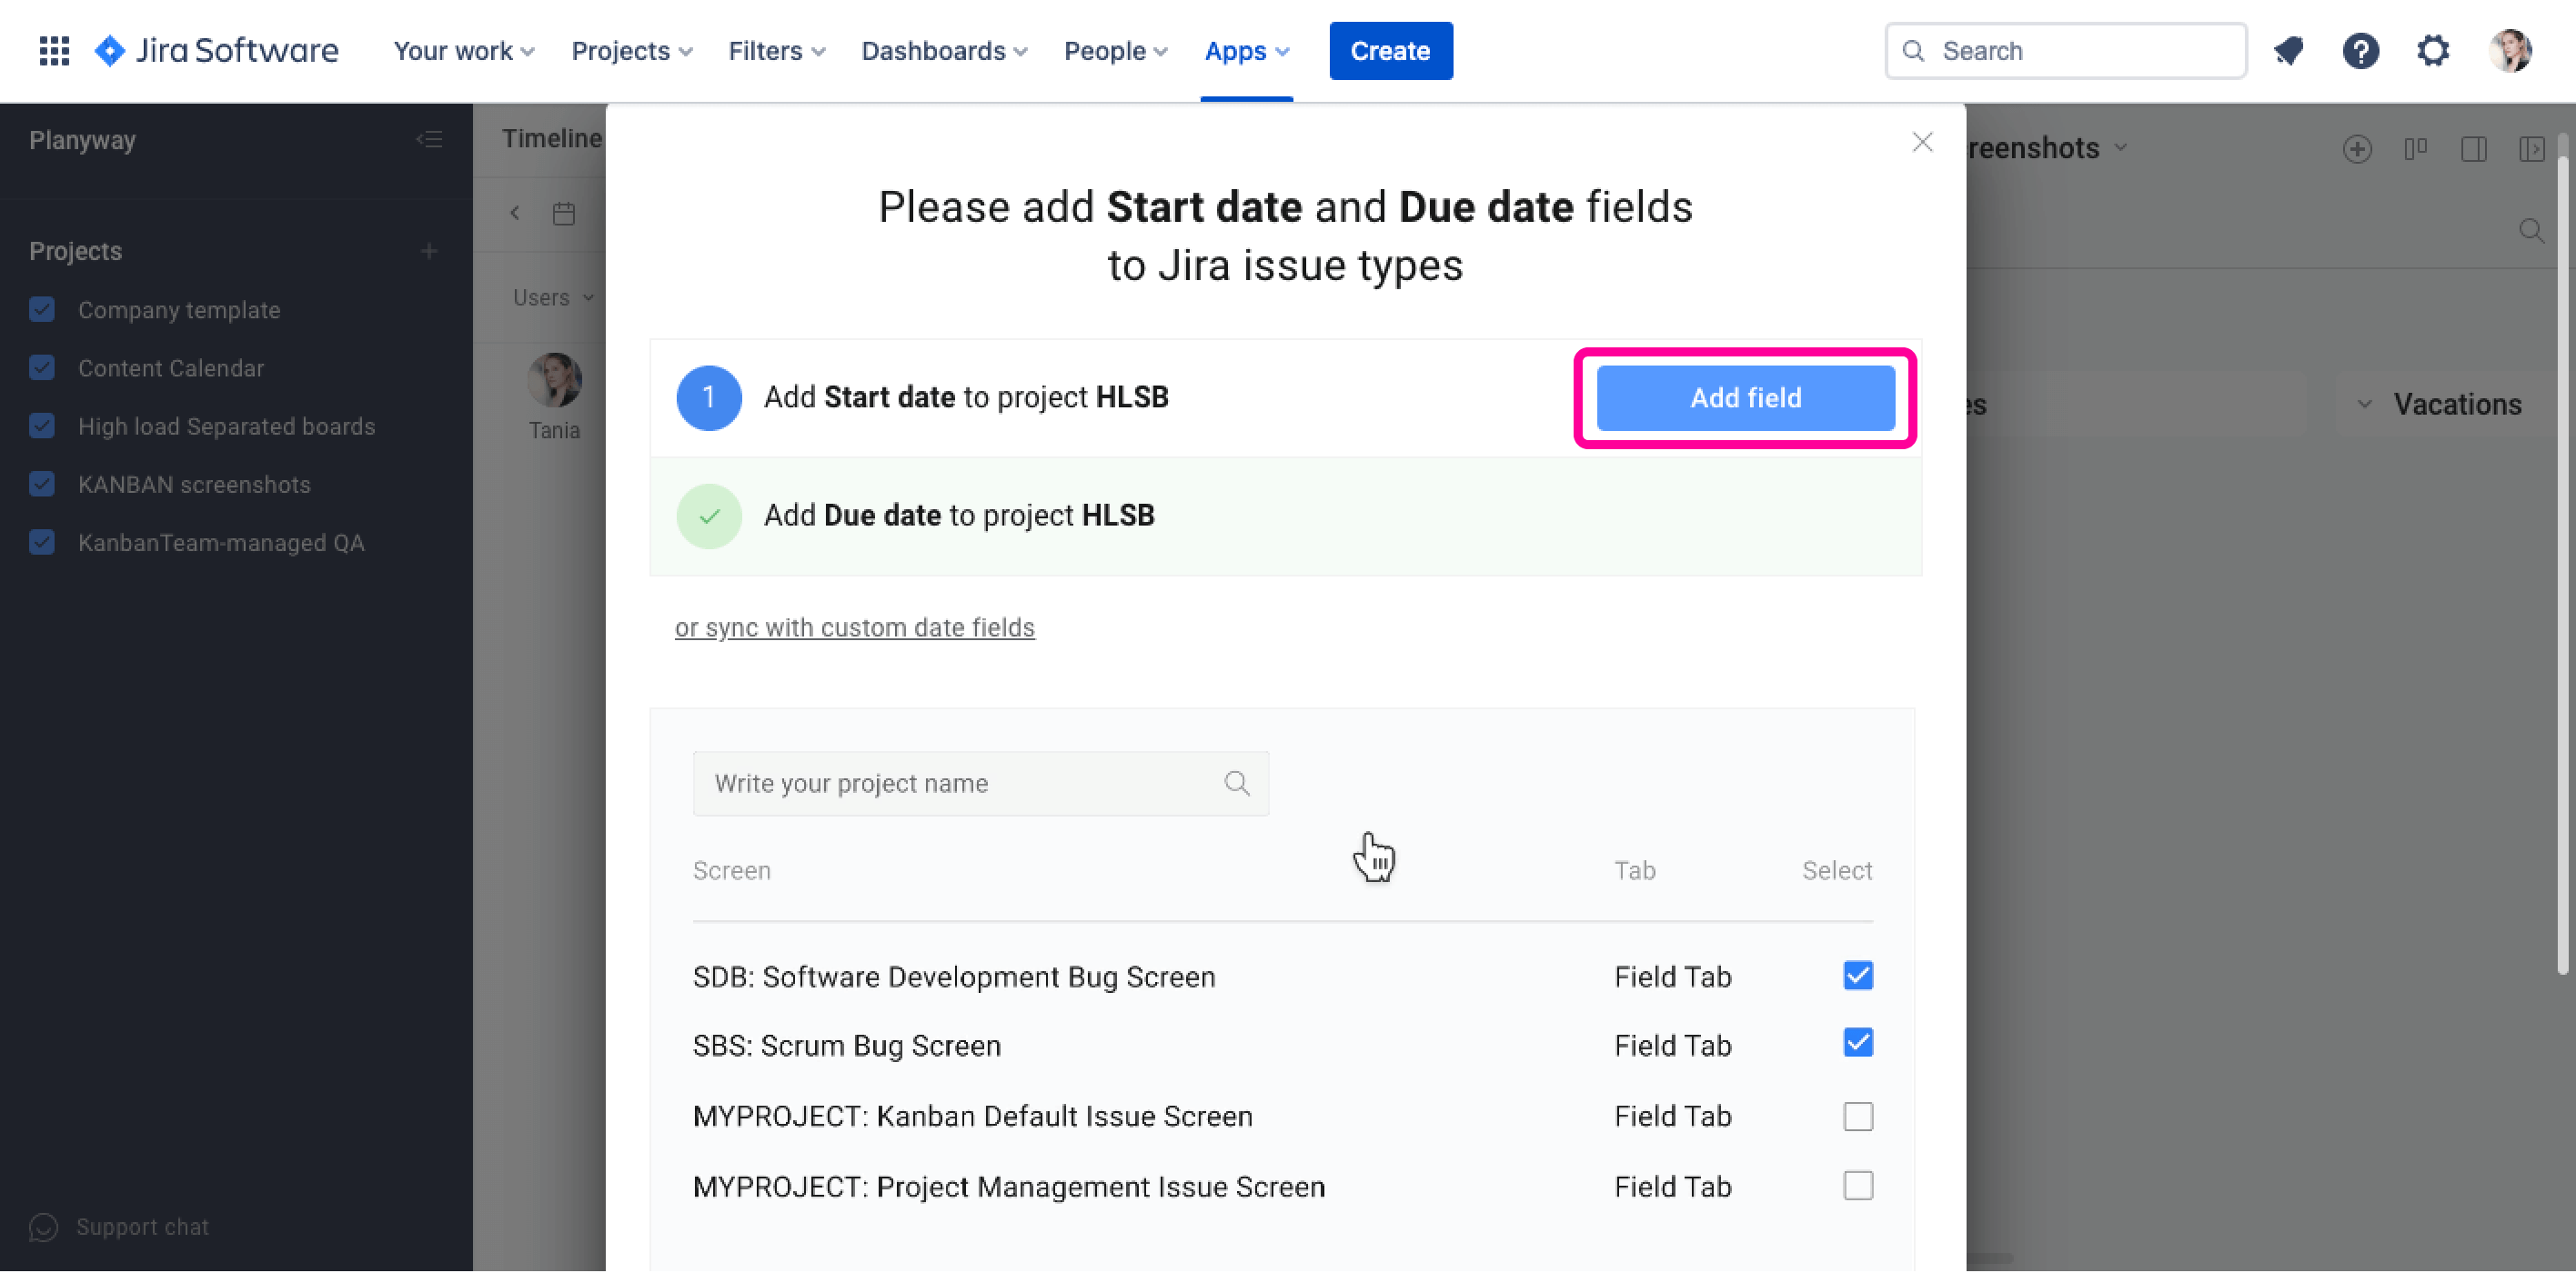 Planyway for Jira Guide Sync Jira Dates